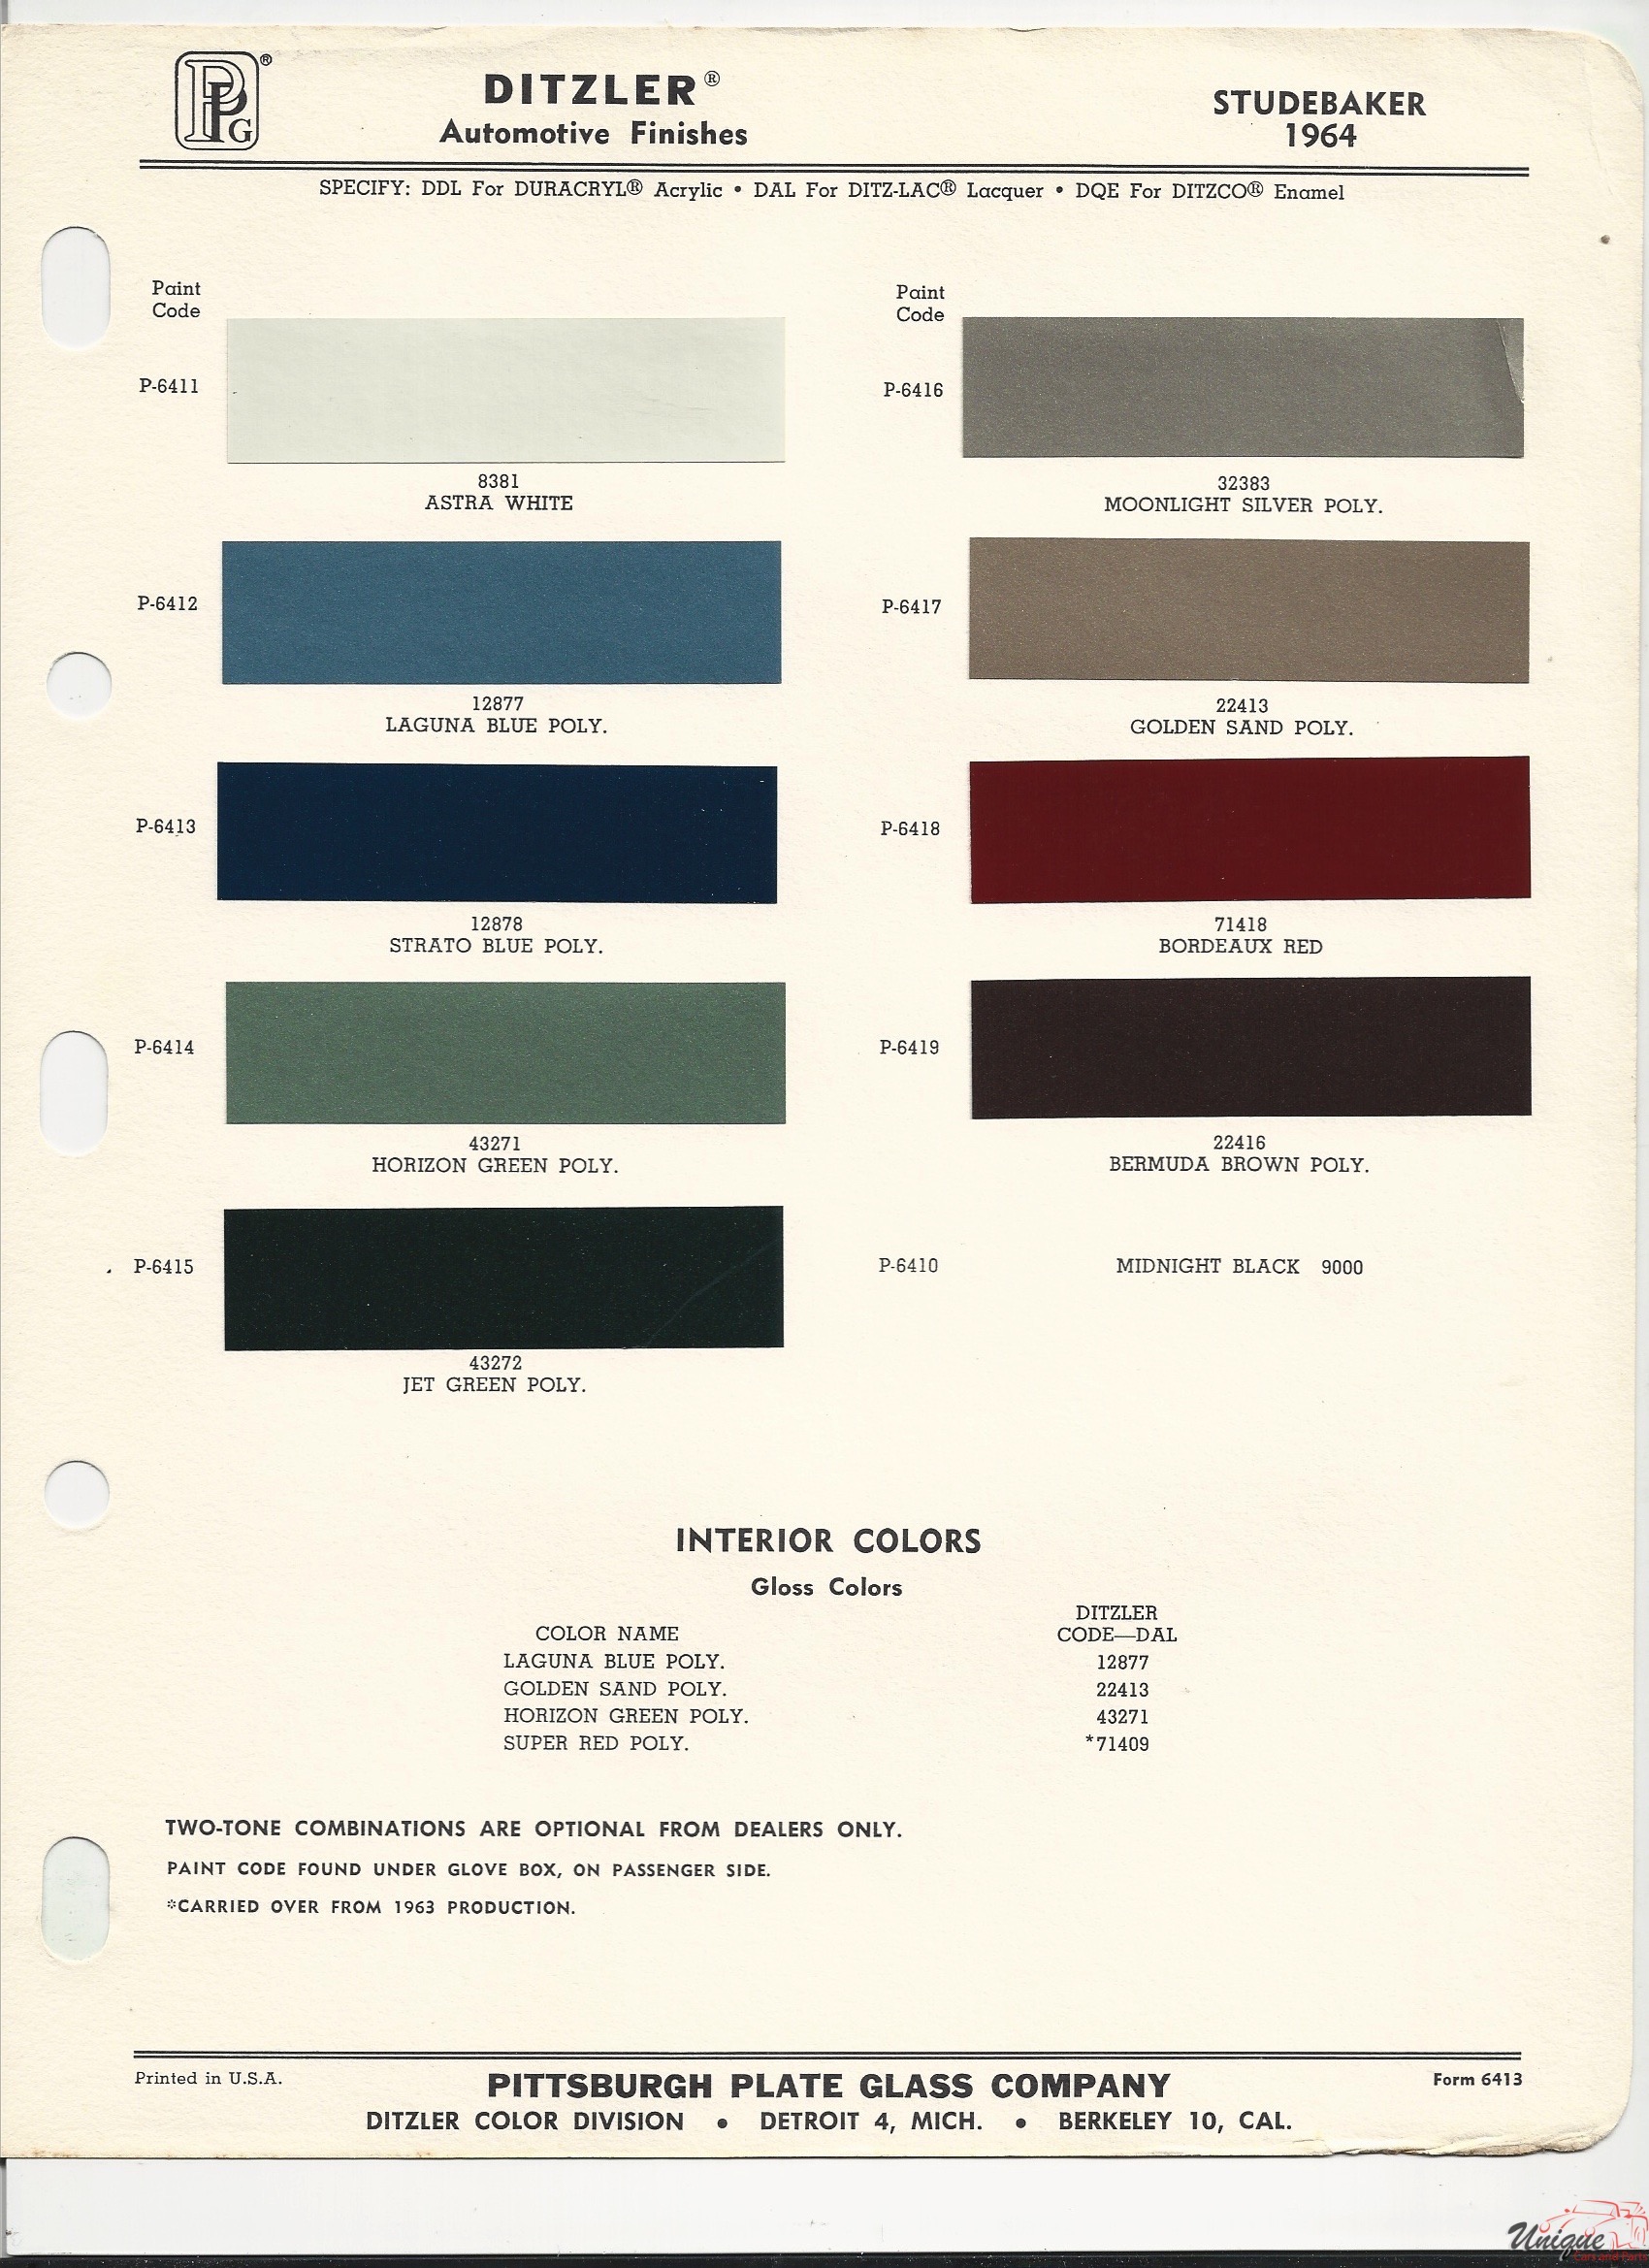 1960 To 1964 Studebaker Paint Charts